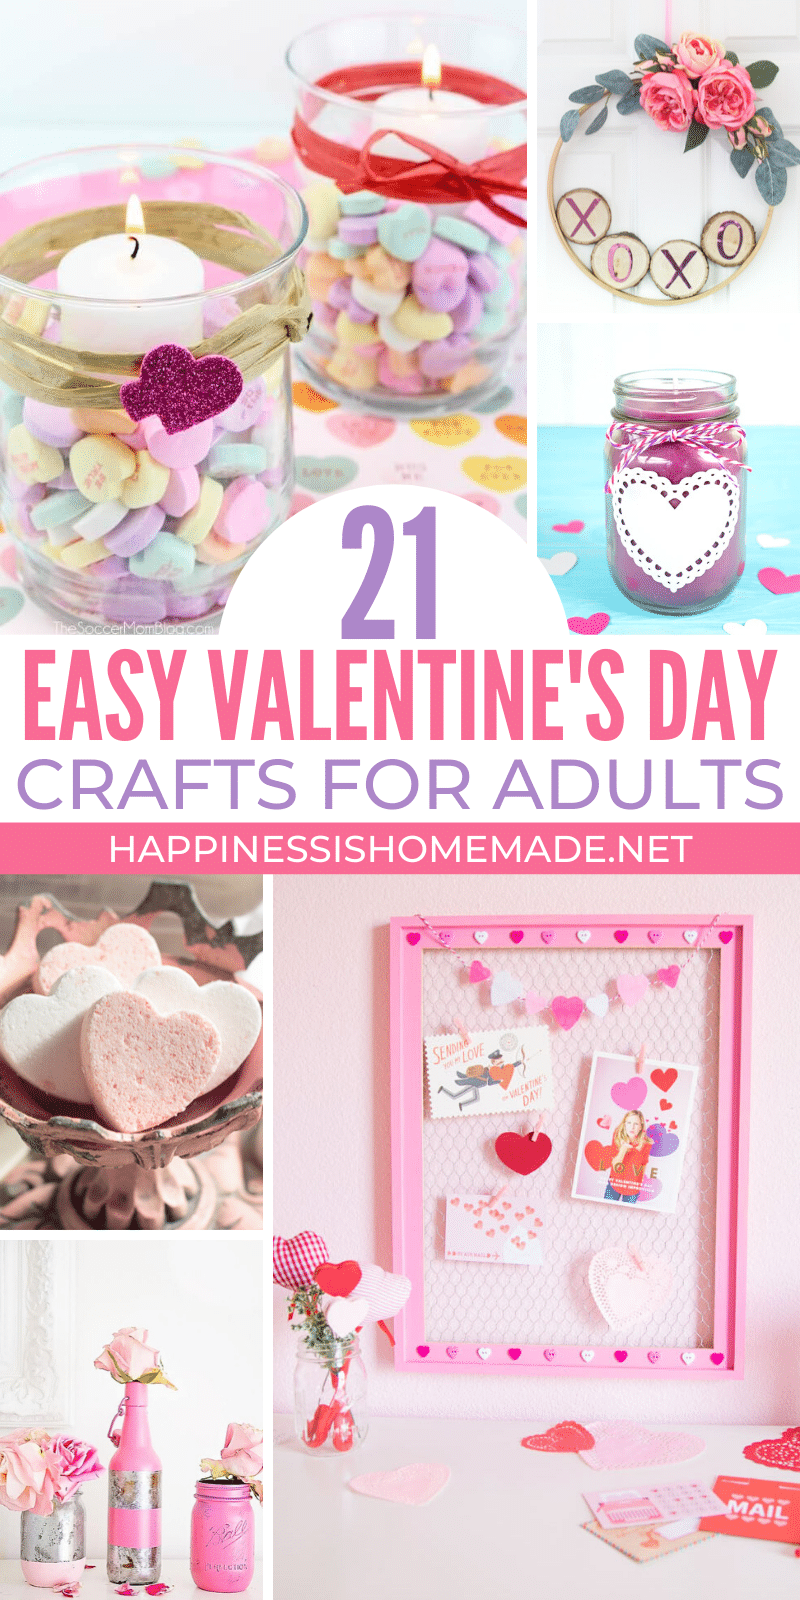 Easy Valentine's Day Crafts - Happiness is Homemade